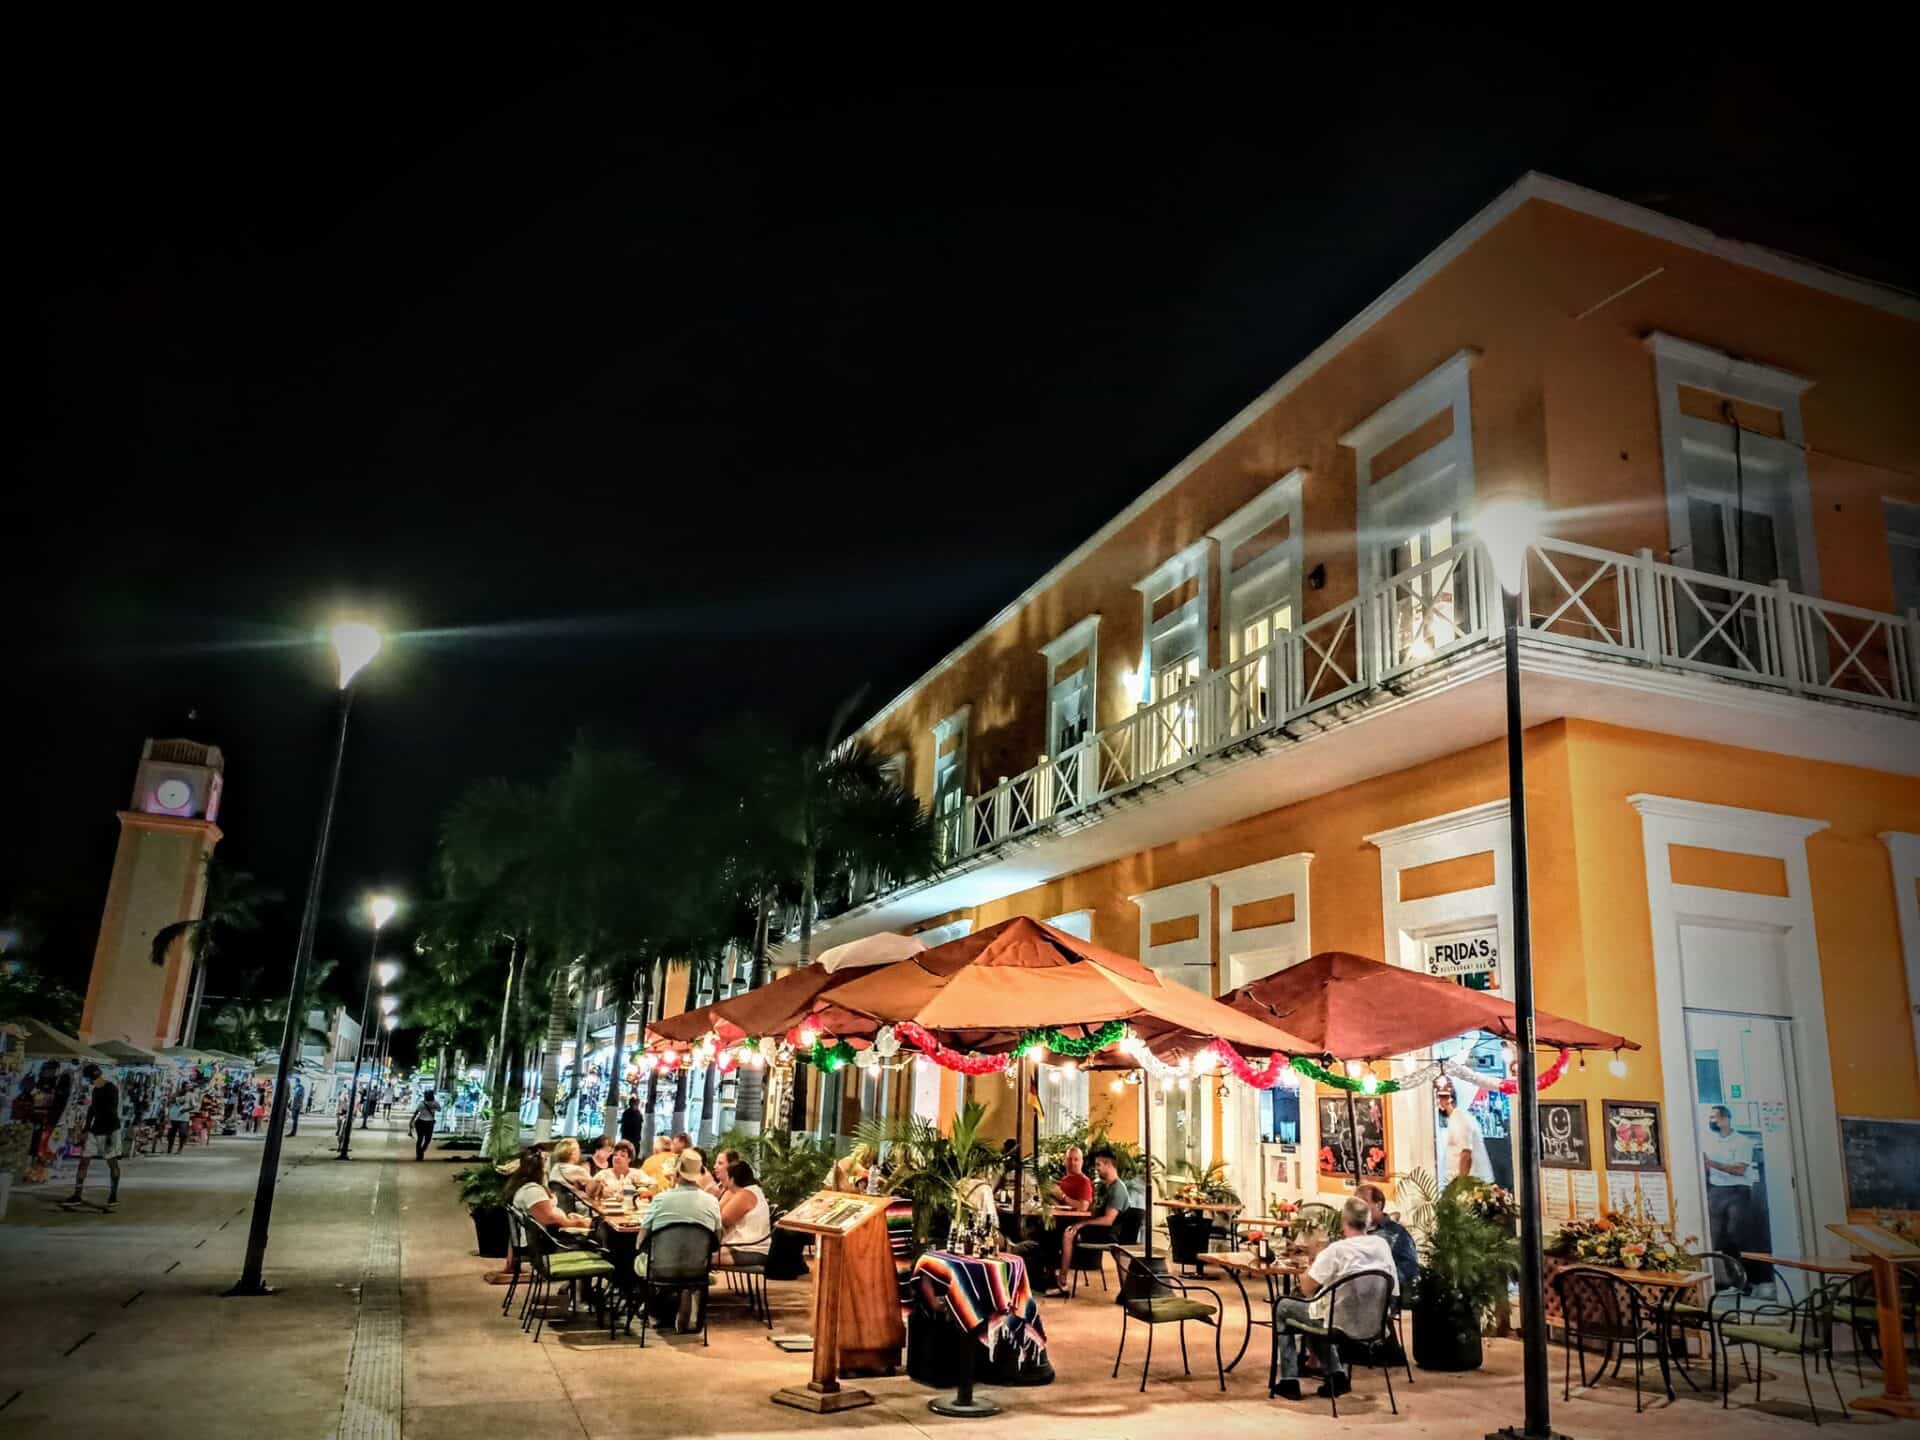 exterior of Mexican restaurant with tables and umbrellas at night